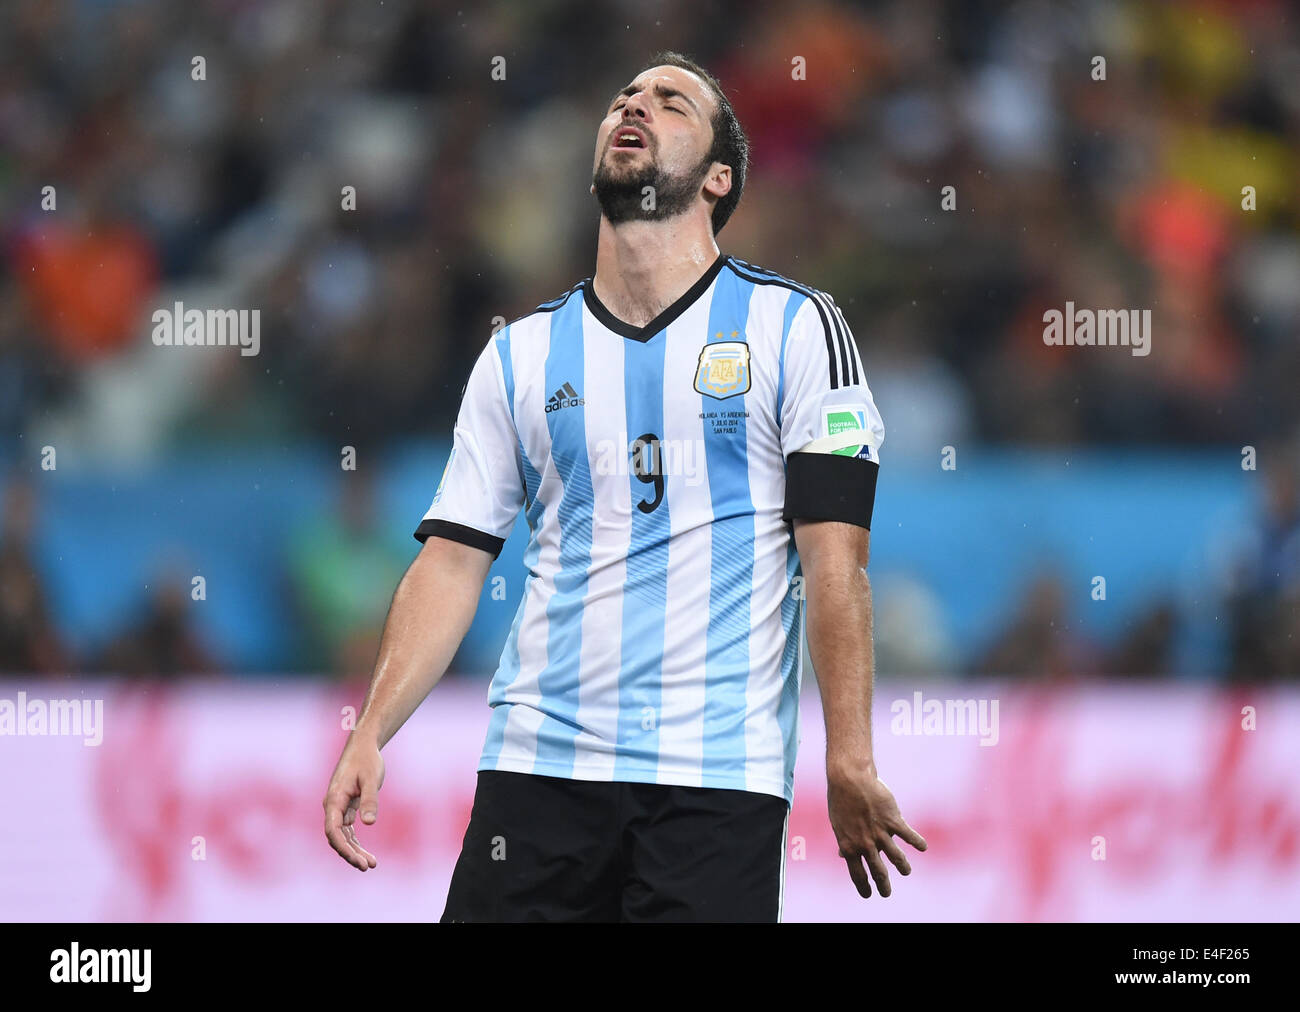 Sao Paulo, Brazil. 09th July, 2014. Gonzalo Higuain of Argentina reacts during the FIFA World Cup 2014 semi-final soccer match between the Netherlands and Argentina at the Arena Corinthians in Sao Paulo, Brazil, 09 July 2014. Photo: Marius Becker/dpa/Alamy Live News Stock Photo